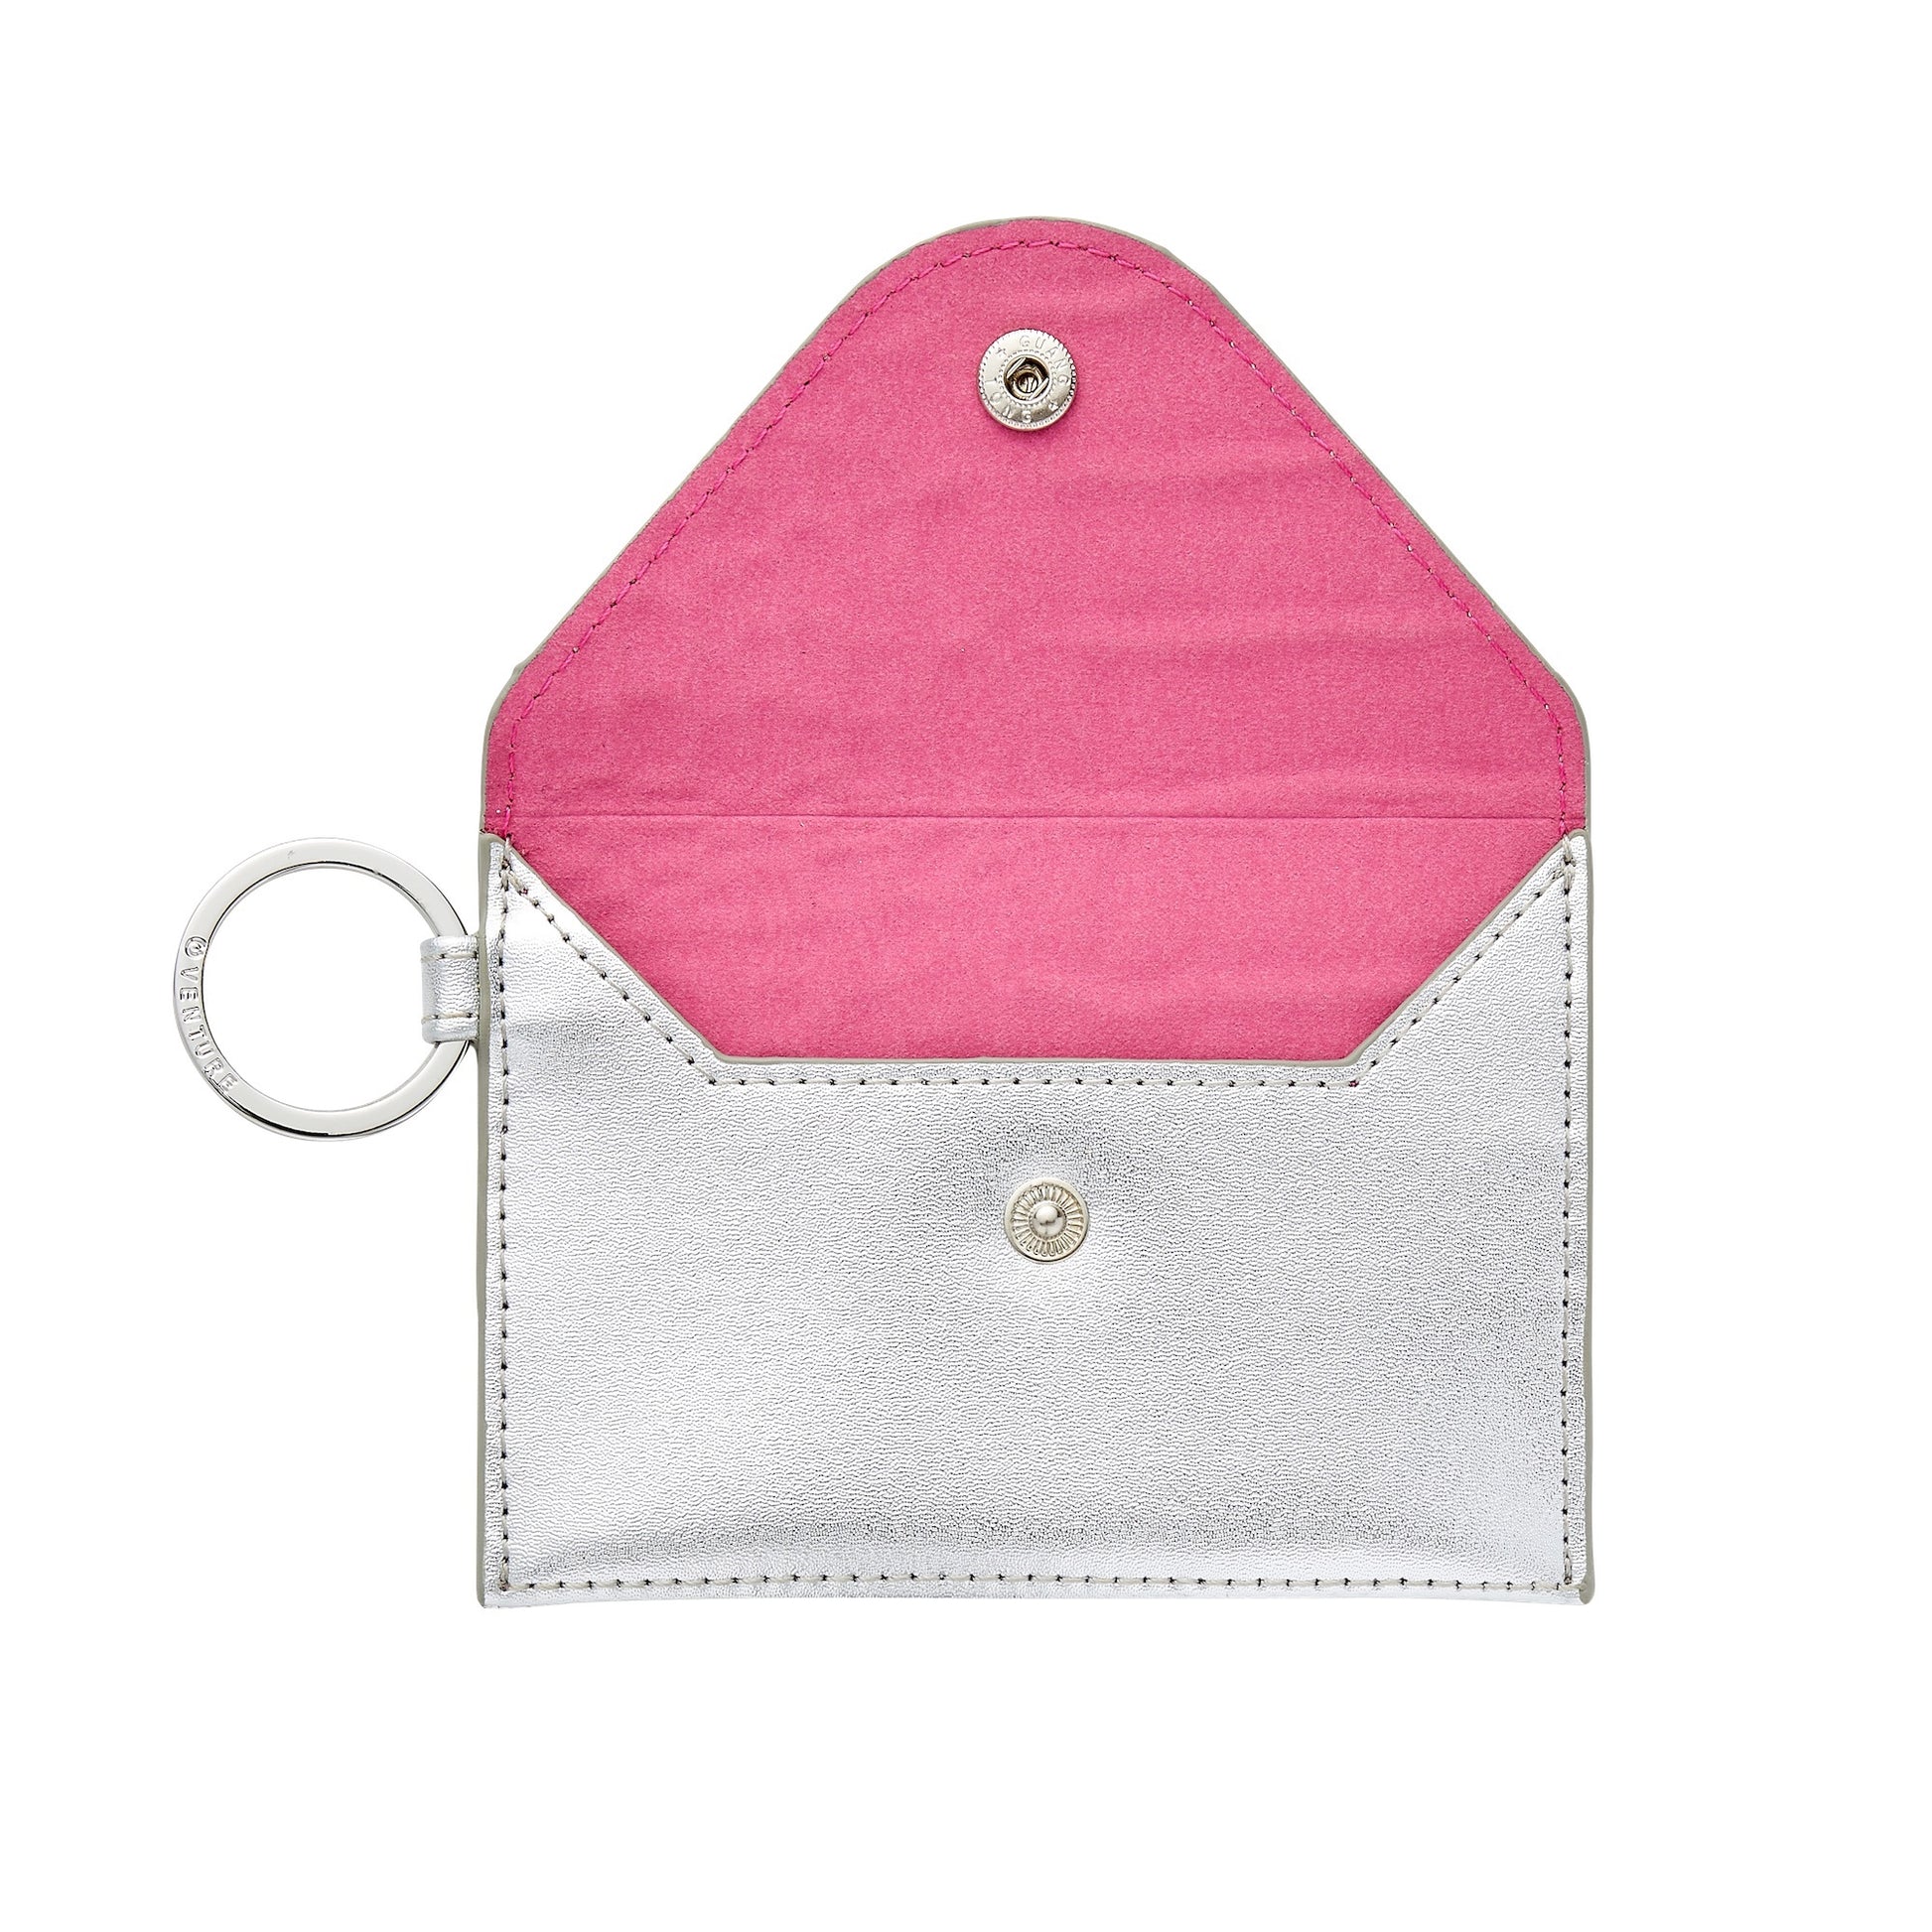 Quicksilver Croc-Embossed - Mini Envelope Wallet - Oventure showing the hot pink interior lining of the silver mini wallet